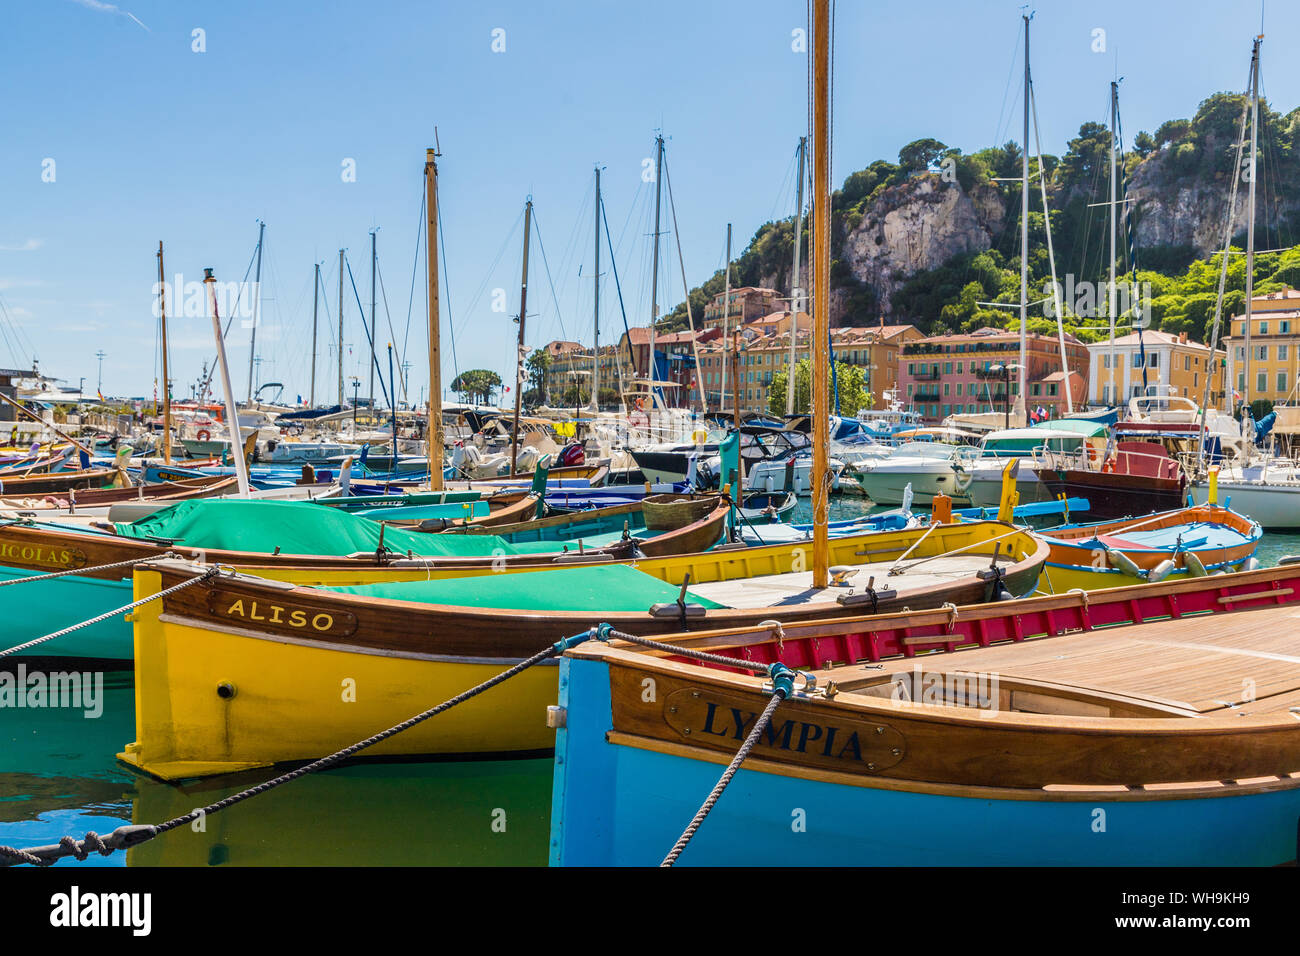 Port Lympia, Nice, Alpes Maritimes, Cote d'Azur, Provence, French Riviera, France, Mediterranean, Europe Stock Photo